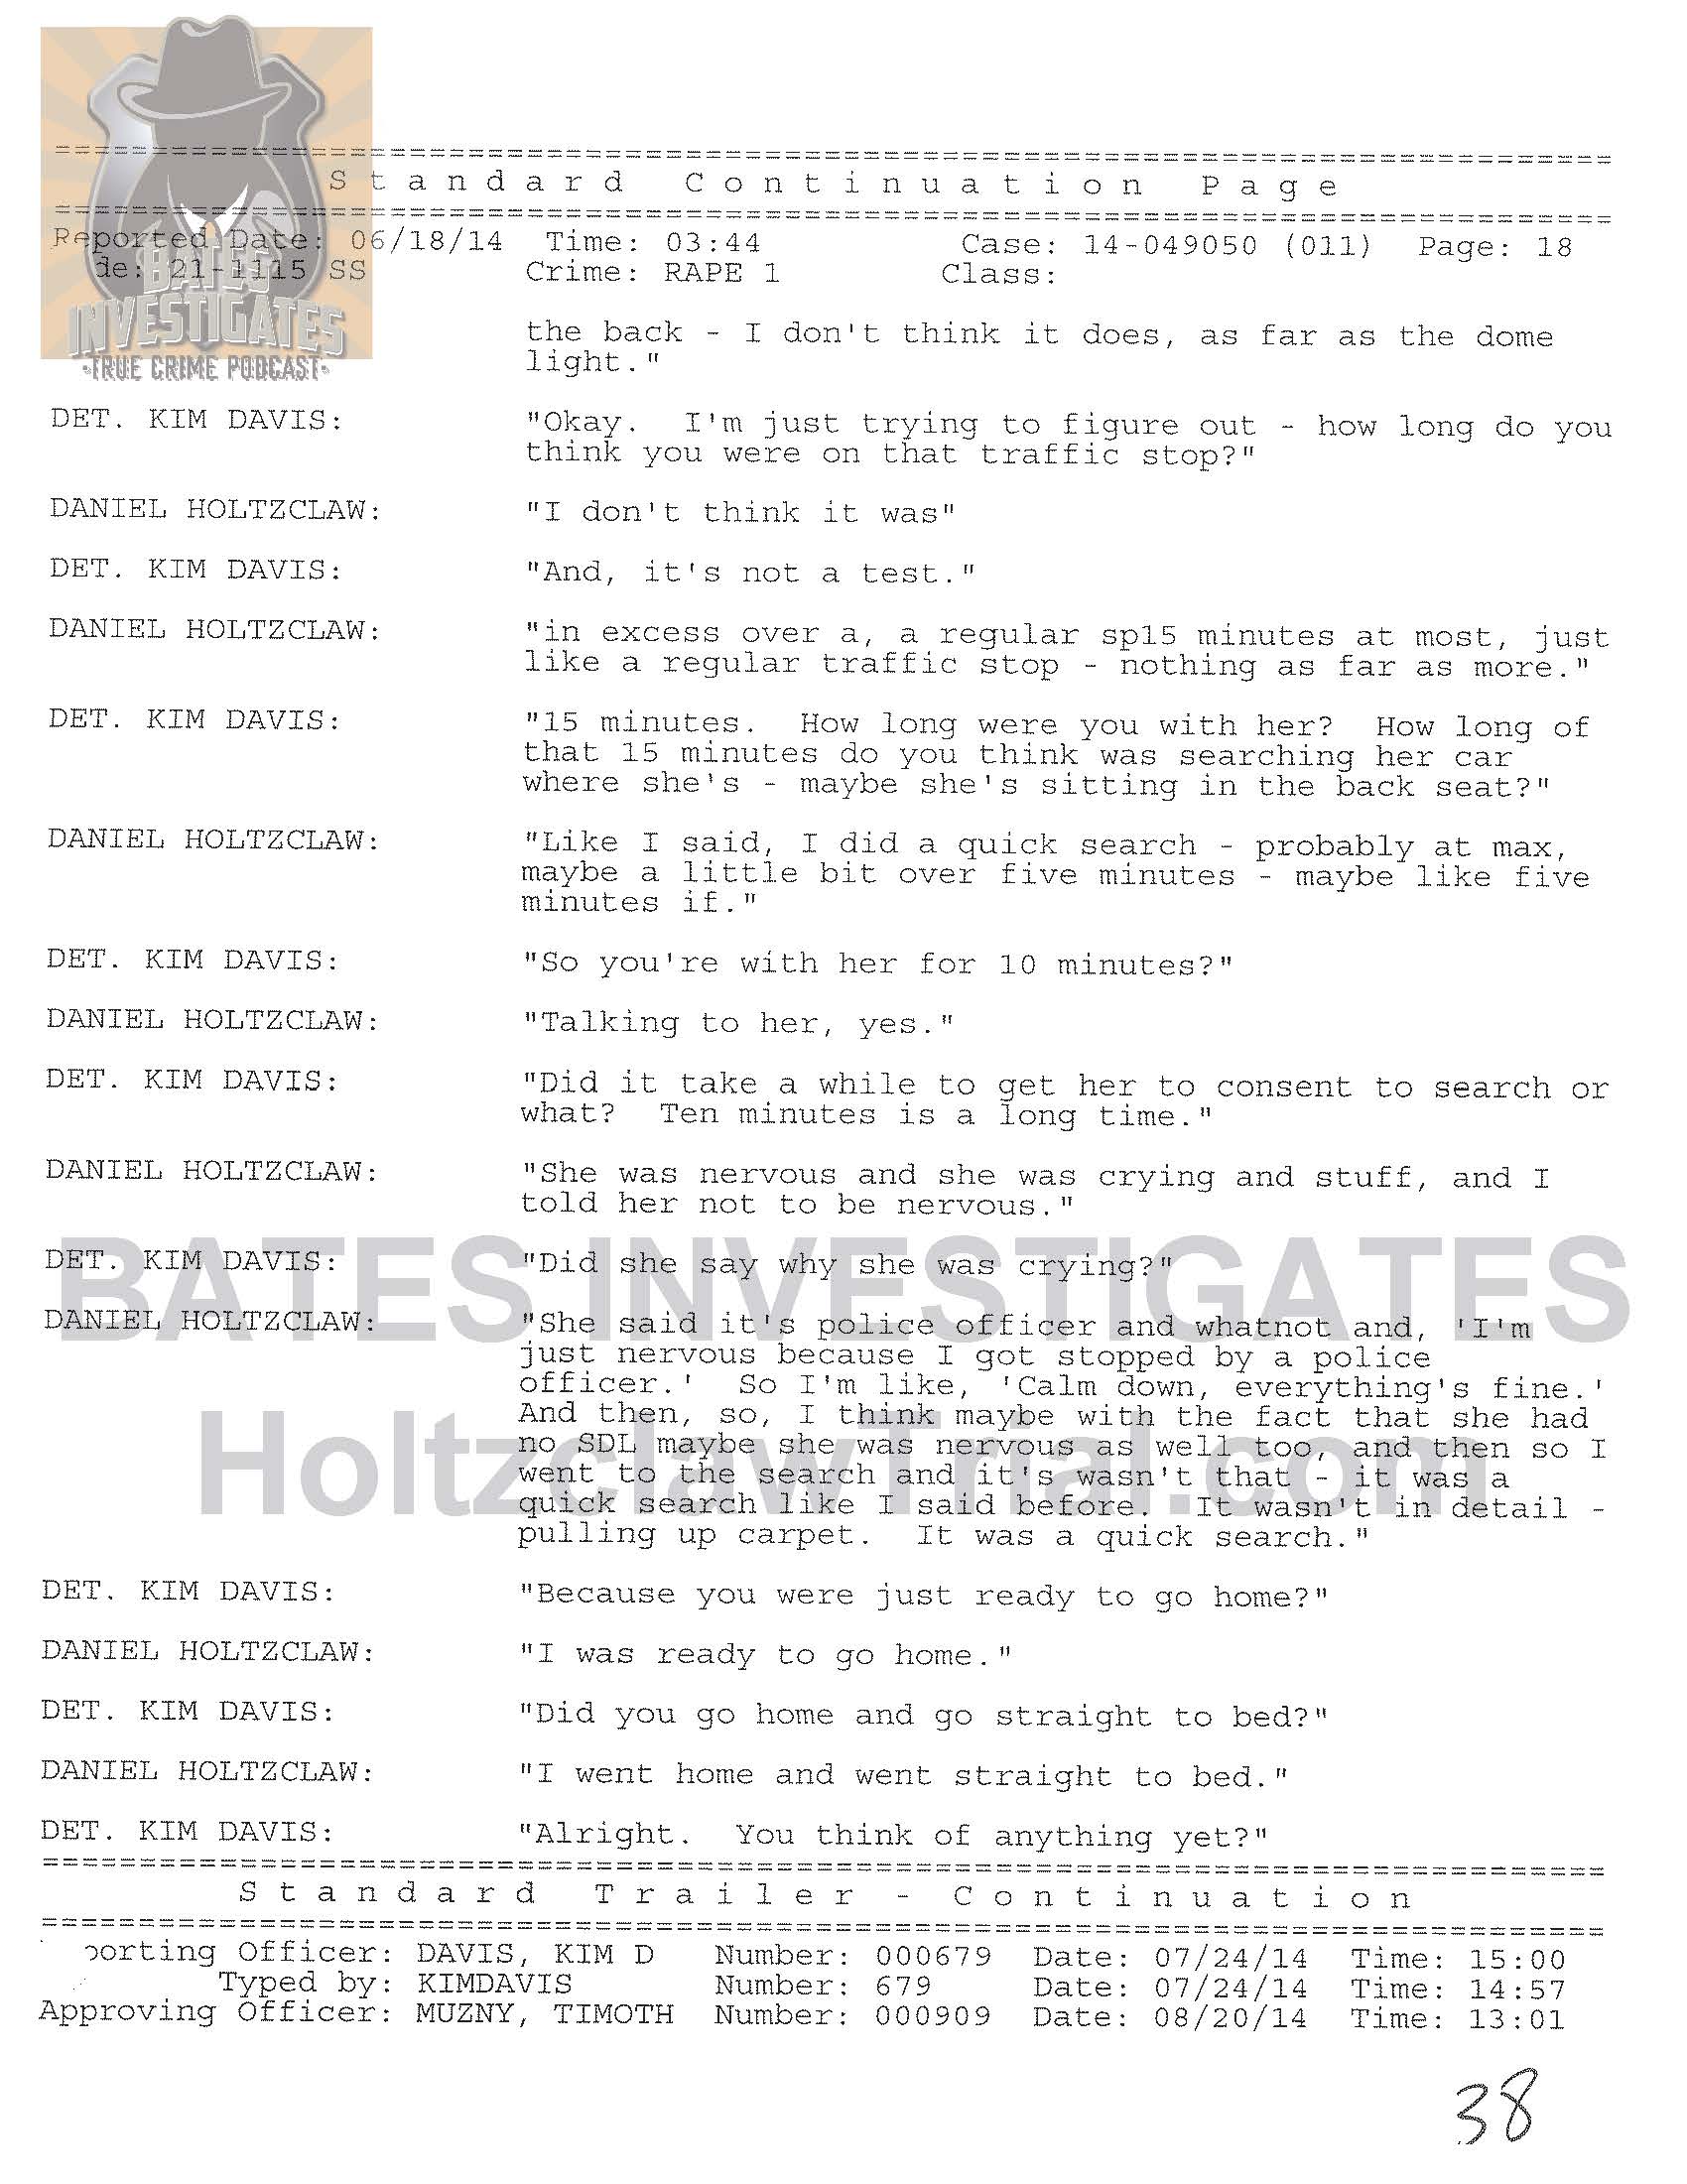 Holtzclaw Interrogation Transcript - Ep02 Redacted_Page_18.jpg